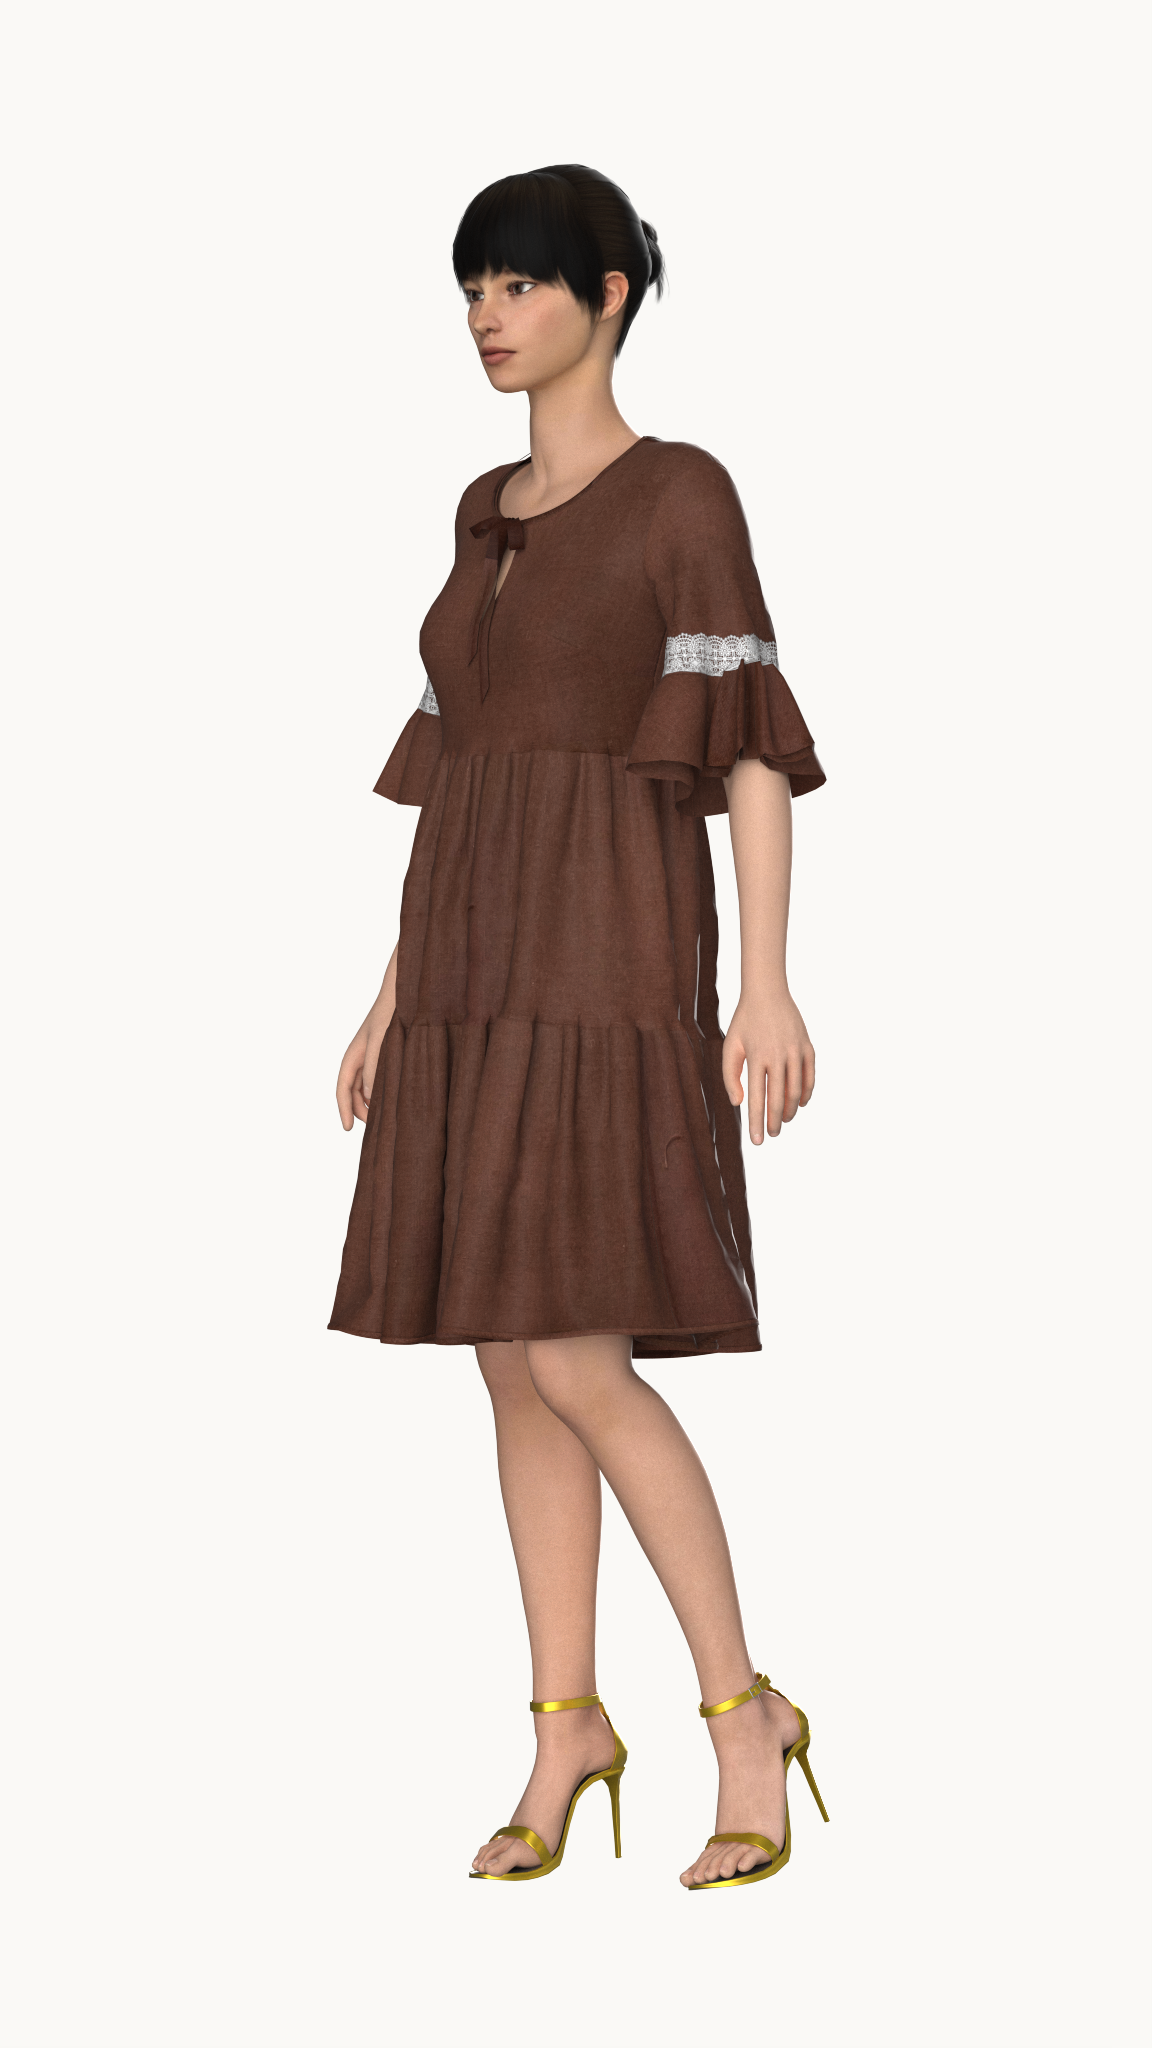 Tiered ruched dress with ruffle sleeve hem (Plus size)